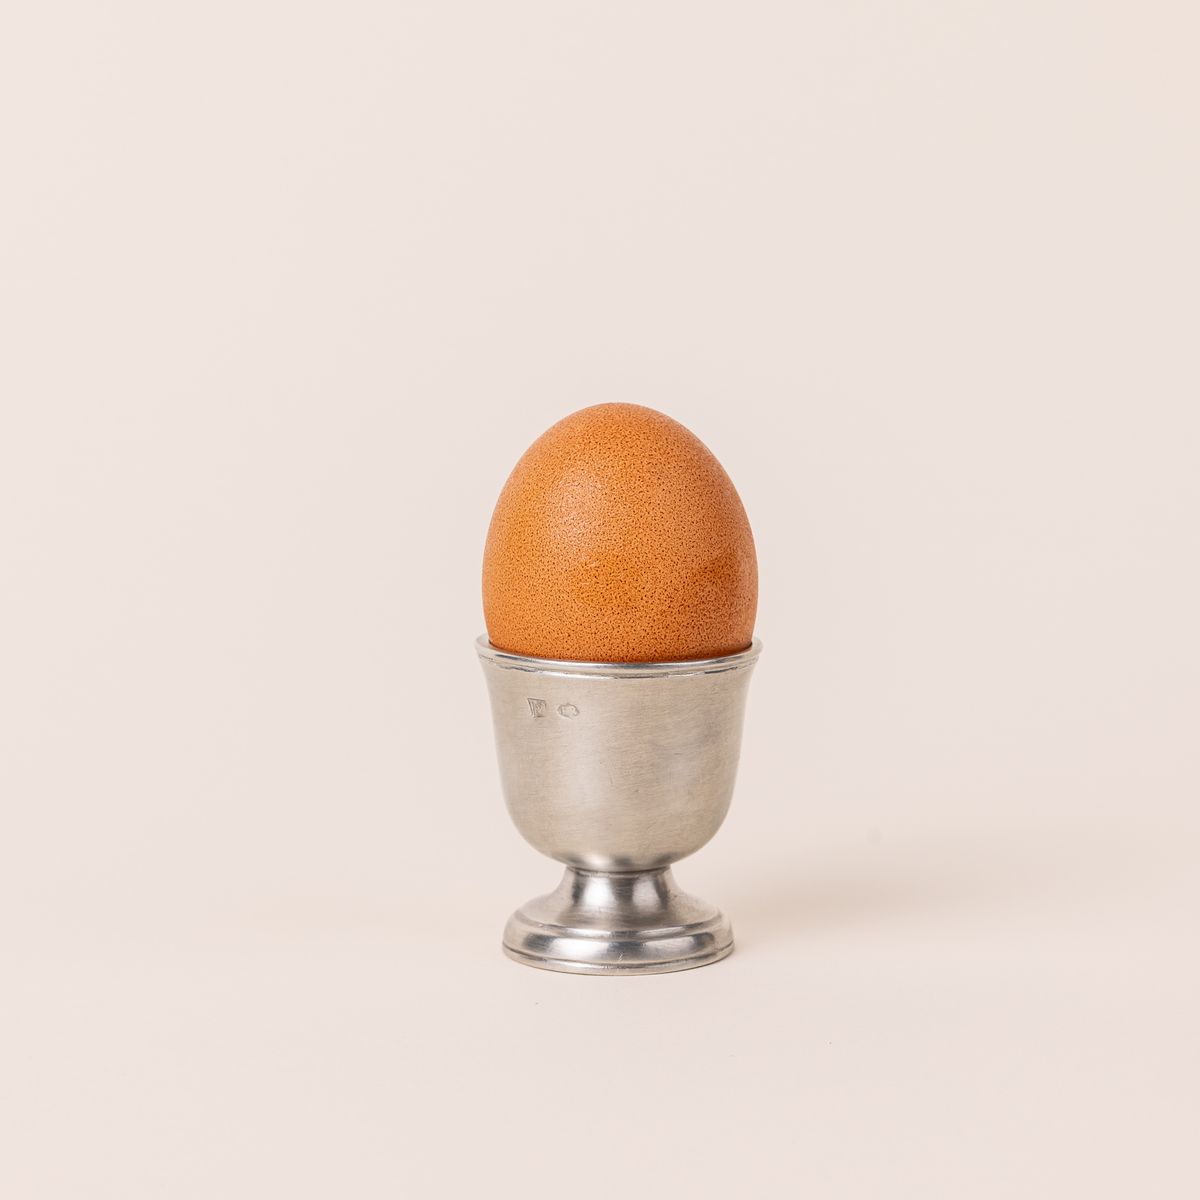 Egg inside a traditional egg cup in a silver pewter and shaped like a small goblet.